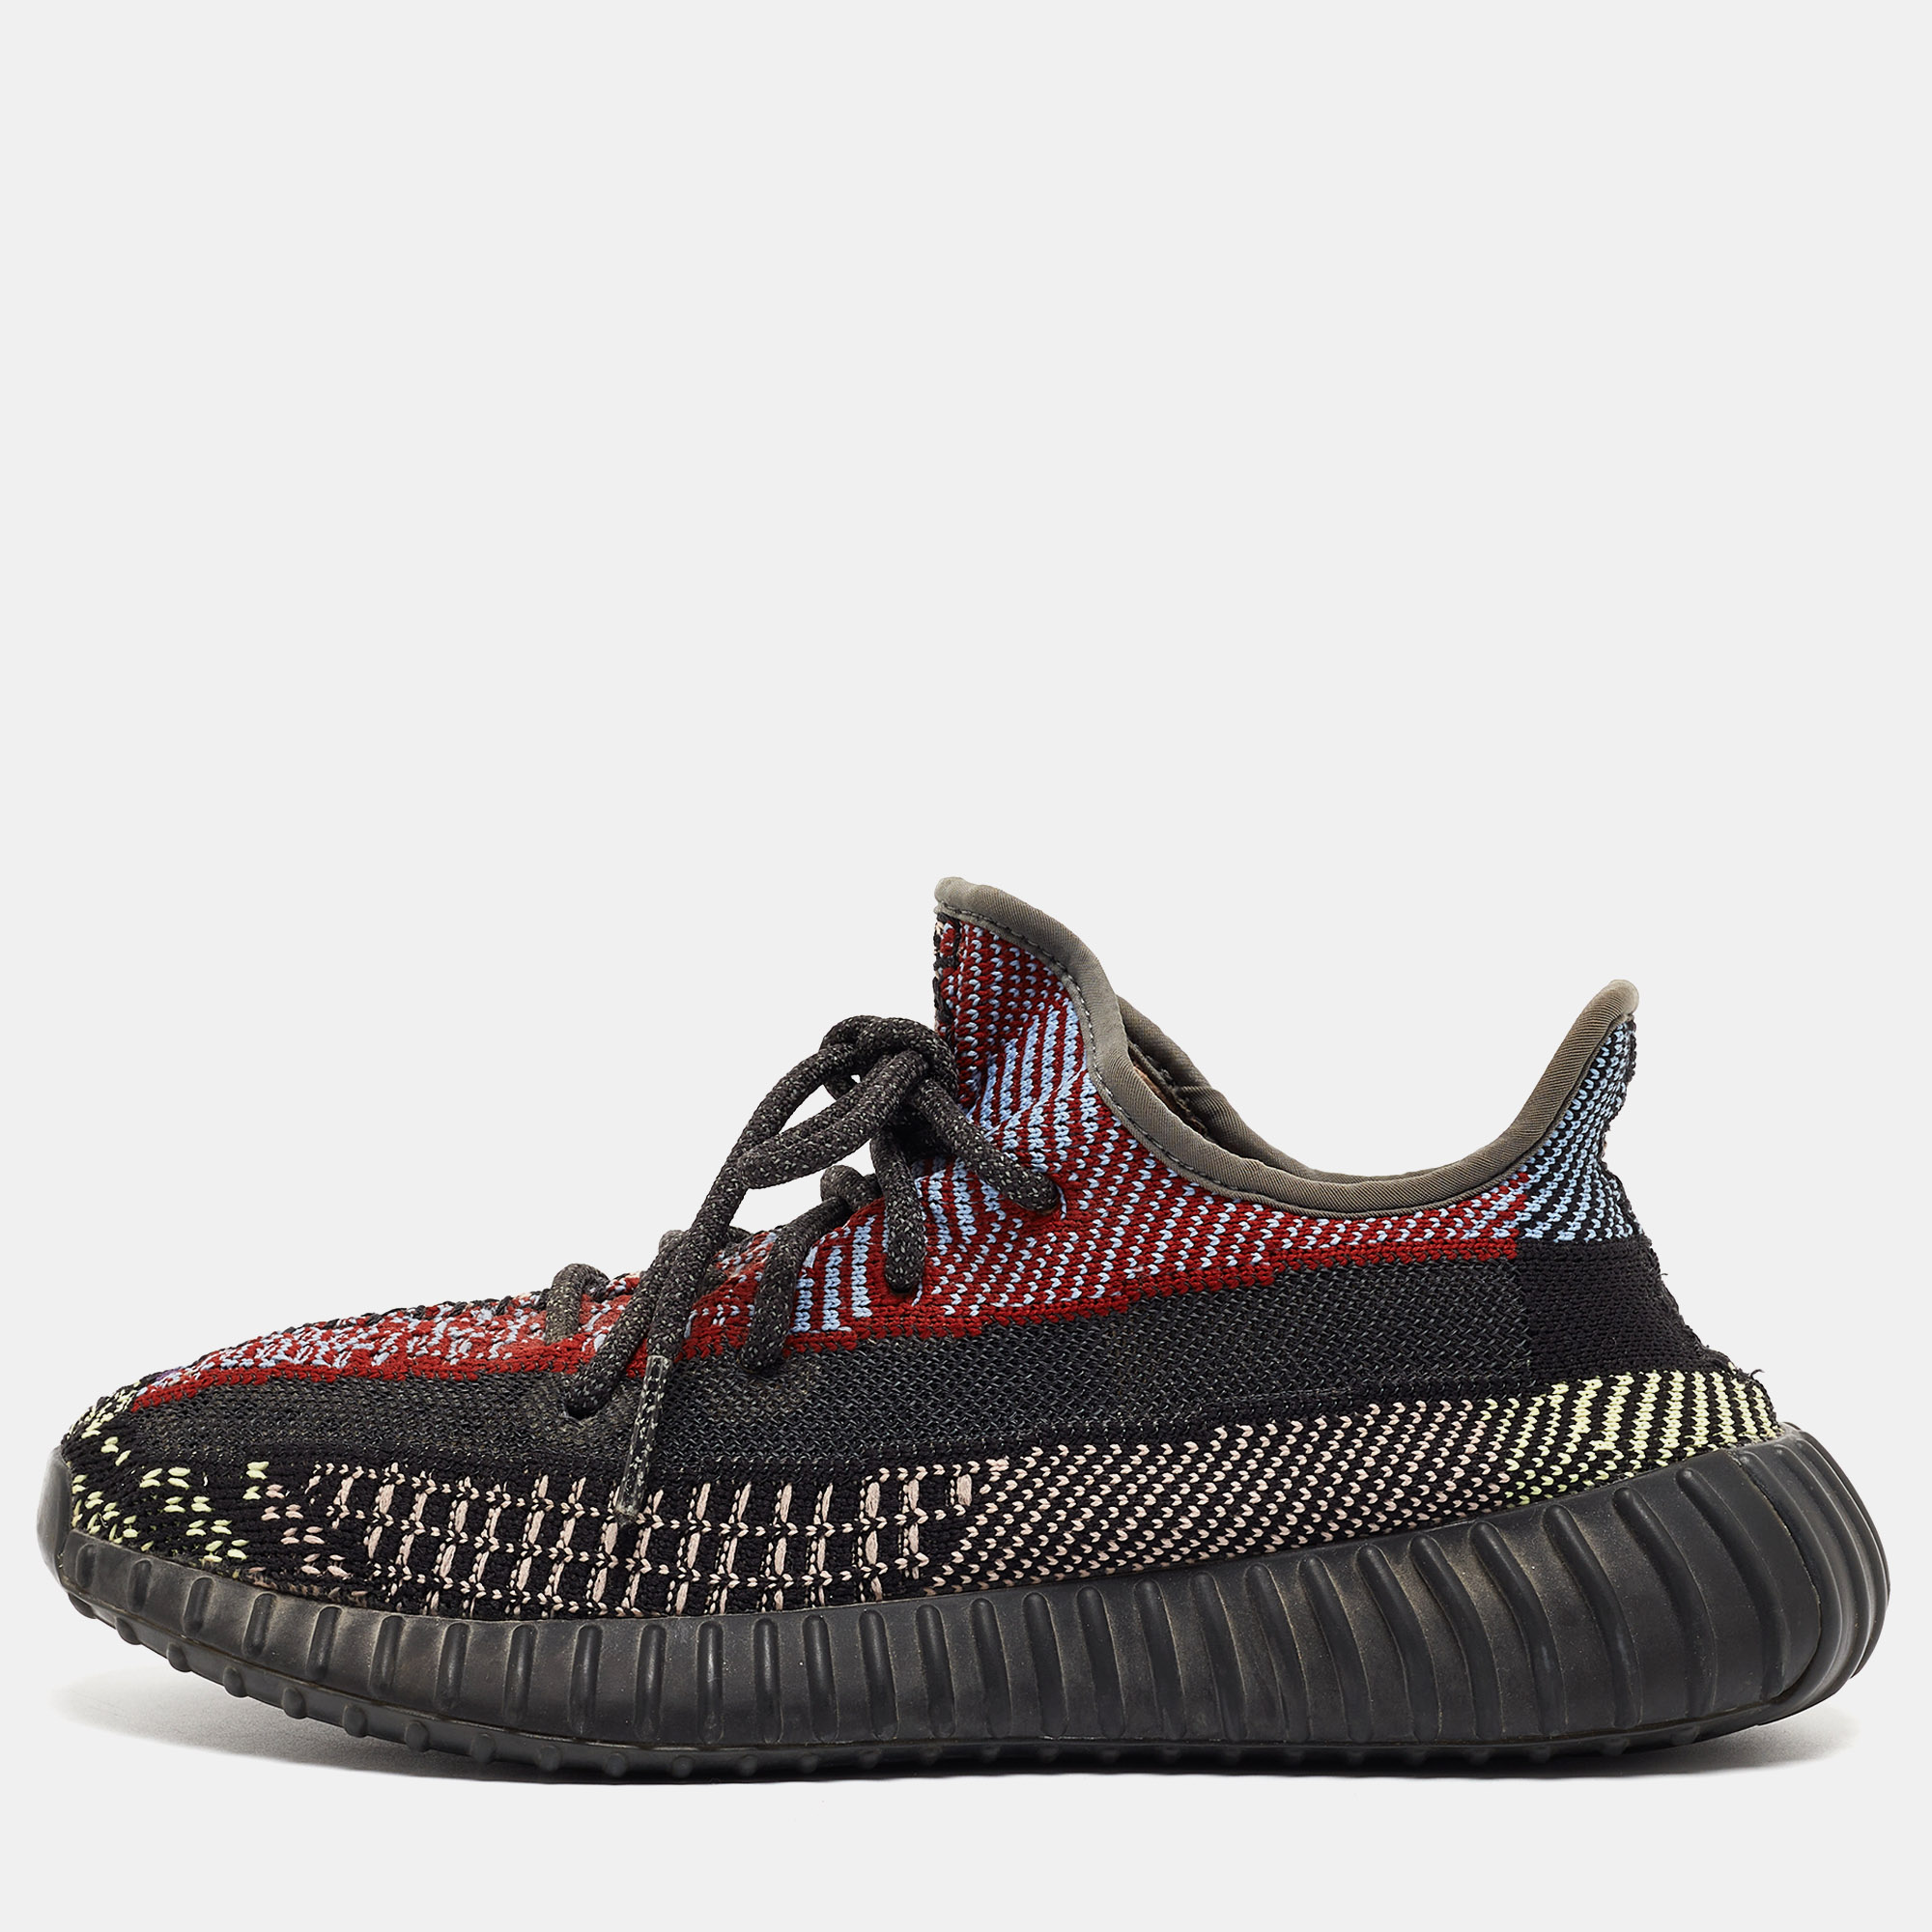 Pre-owned Yeezy X Adidas Multicolor Mesh And Fabric Boost 350 V2 Yecheil Reflective Sneakers Size 40